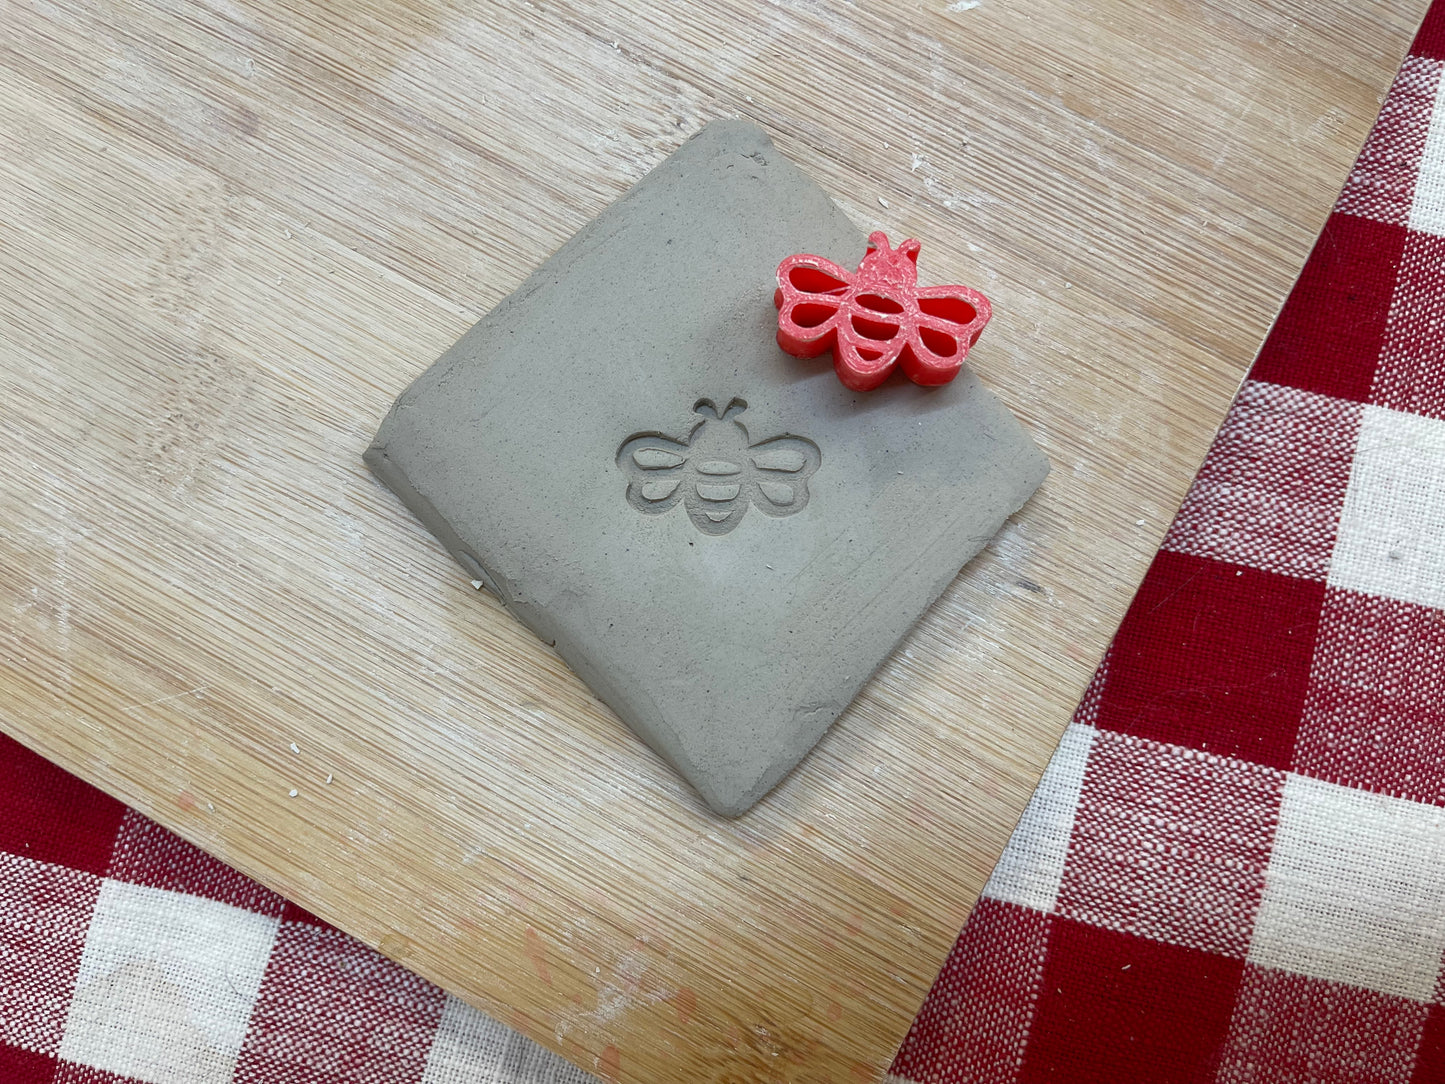 Bee Mini Pottery Stamp - April 2022 Stamp of the Month, plastic 3D printed, multiple sizes